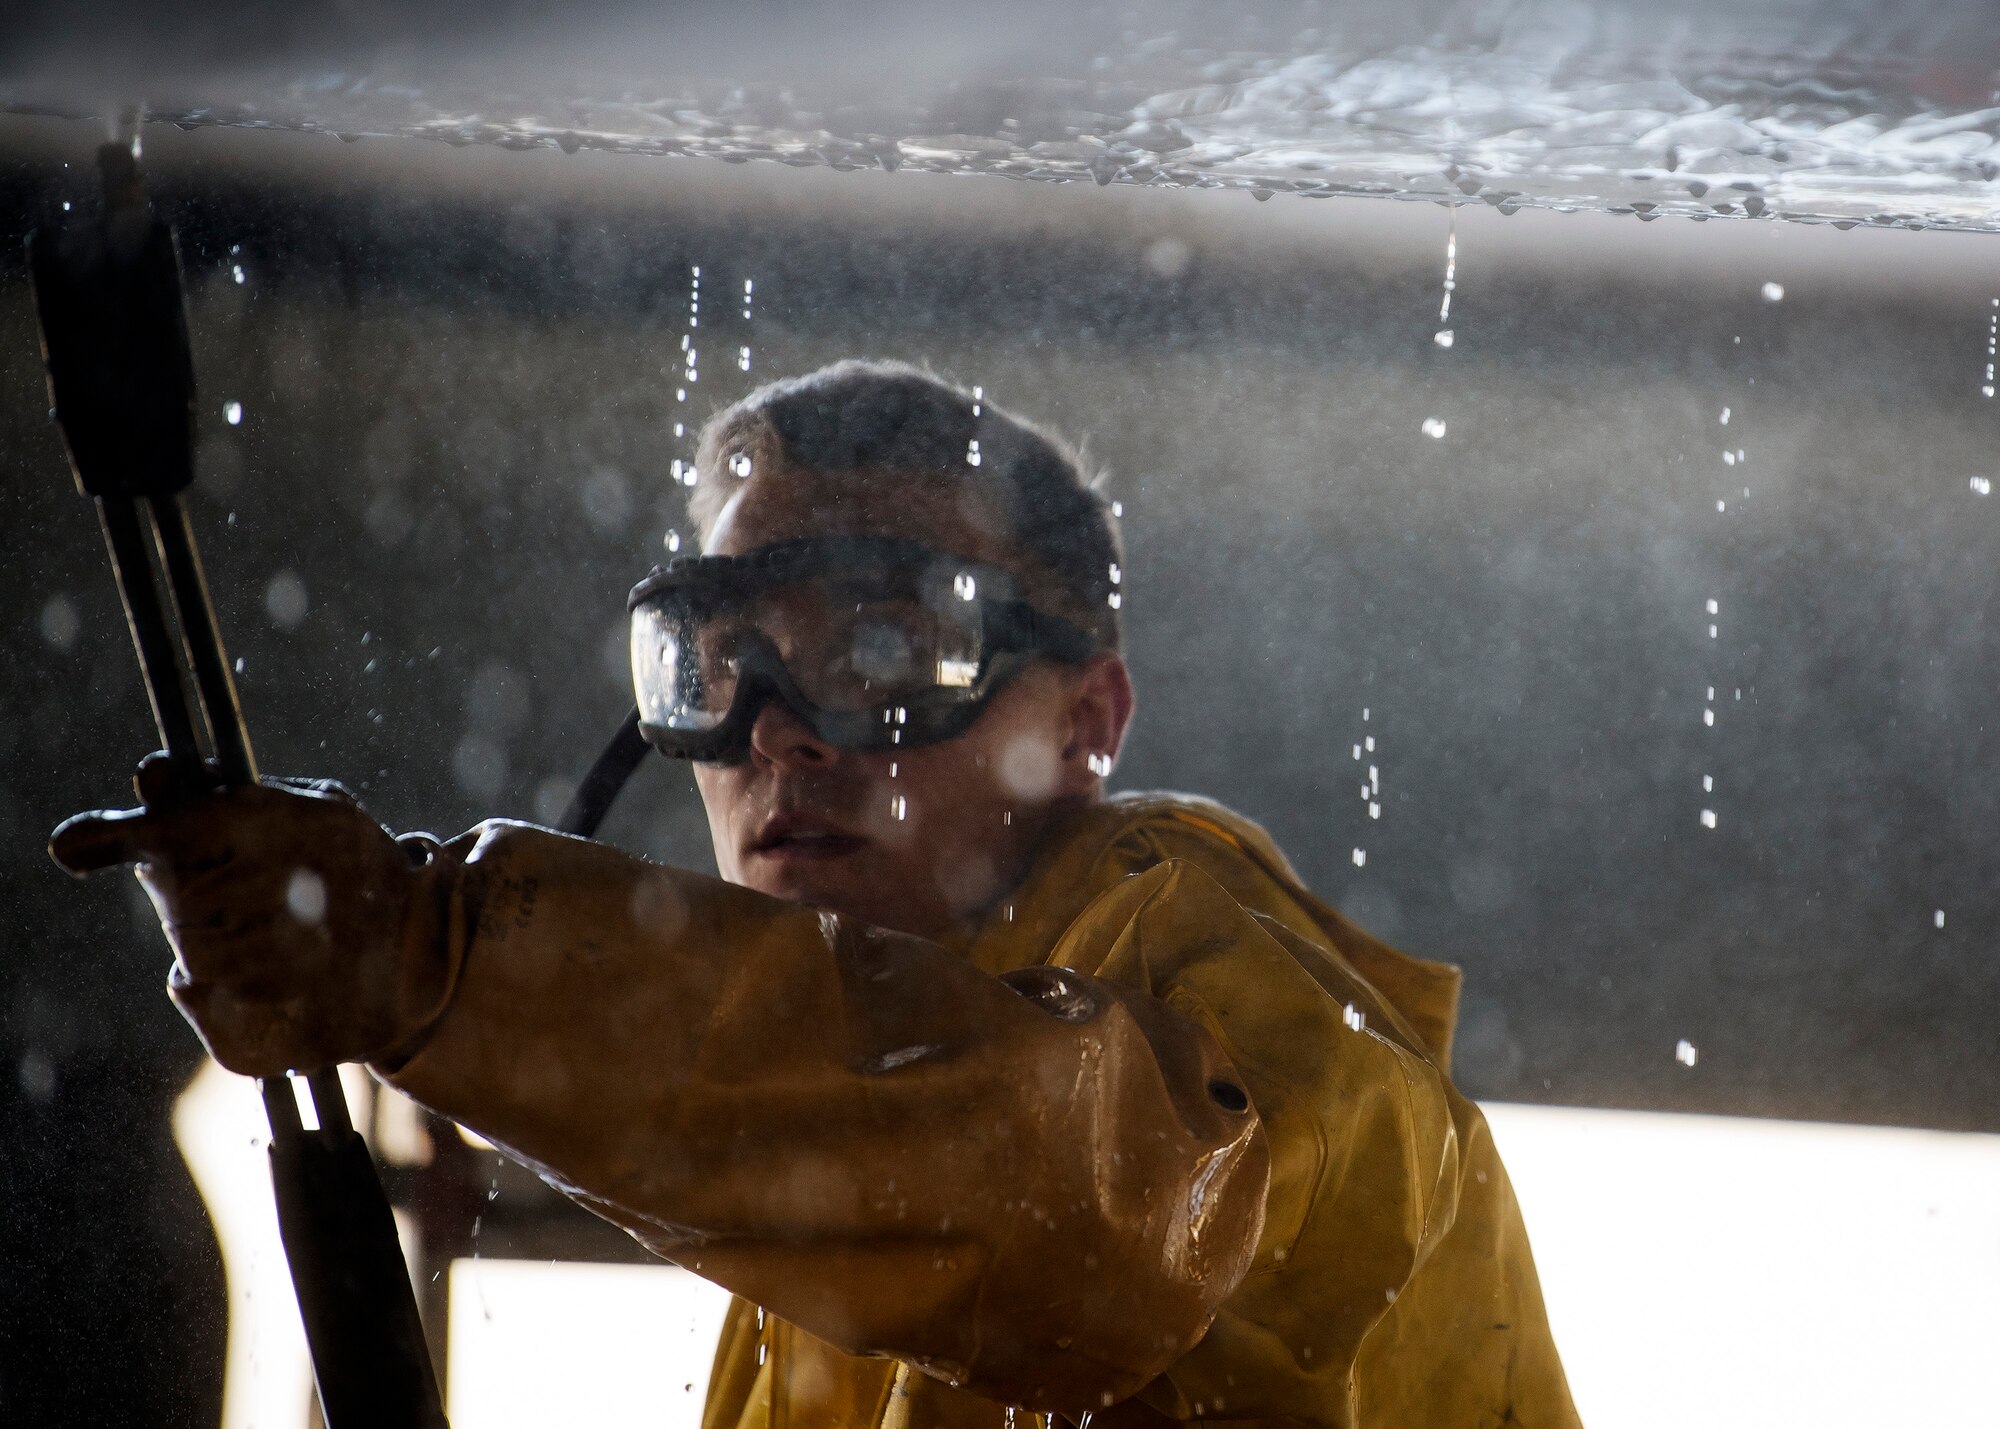 Airman 1st Class Eric Foster, 74th Aircraft Maintenance unit crew chief, uses a power washer to clean an A-10C Thunderbolt II, Feb. 25, 2019, at Moody Air force Base, Ga. On top of their daily scheduled maintenance a team of six Airmen dedicated over 10 hours washing the A-10 to ensure the aircraft was free of any surface or structural deficiencies that could present a safety hazard during flight. (U.S. Air Force photo by Airman 1st Class Eugene Oliver)